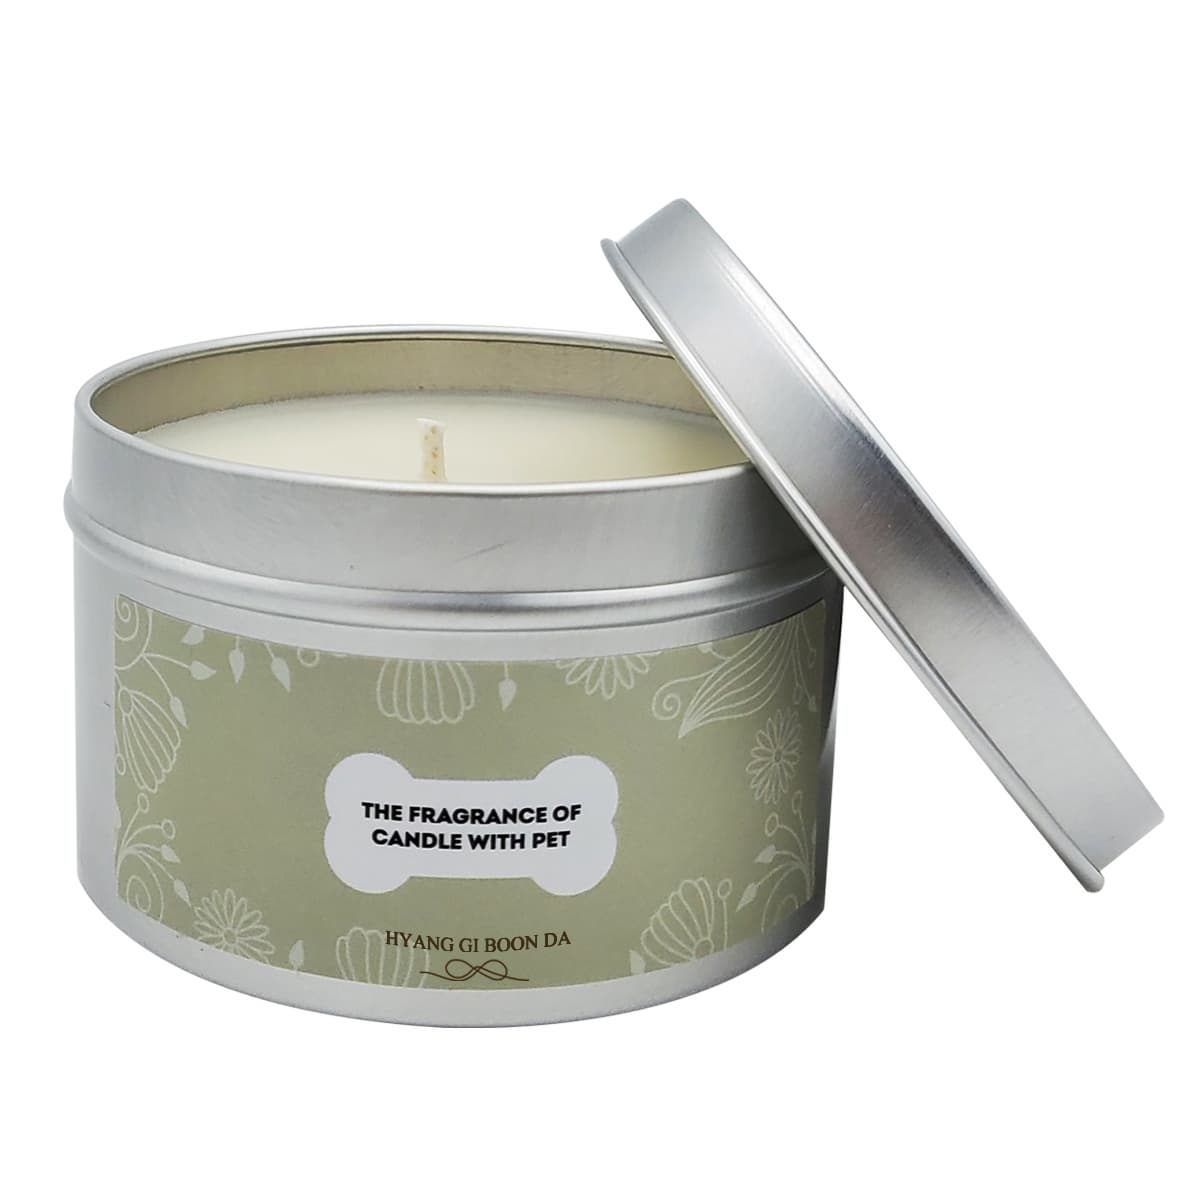 Soy candle with Pet